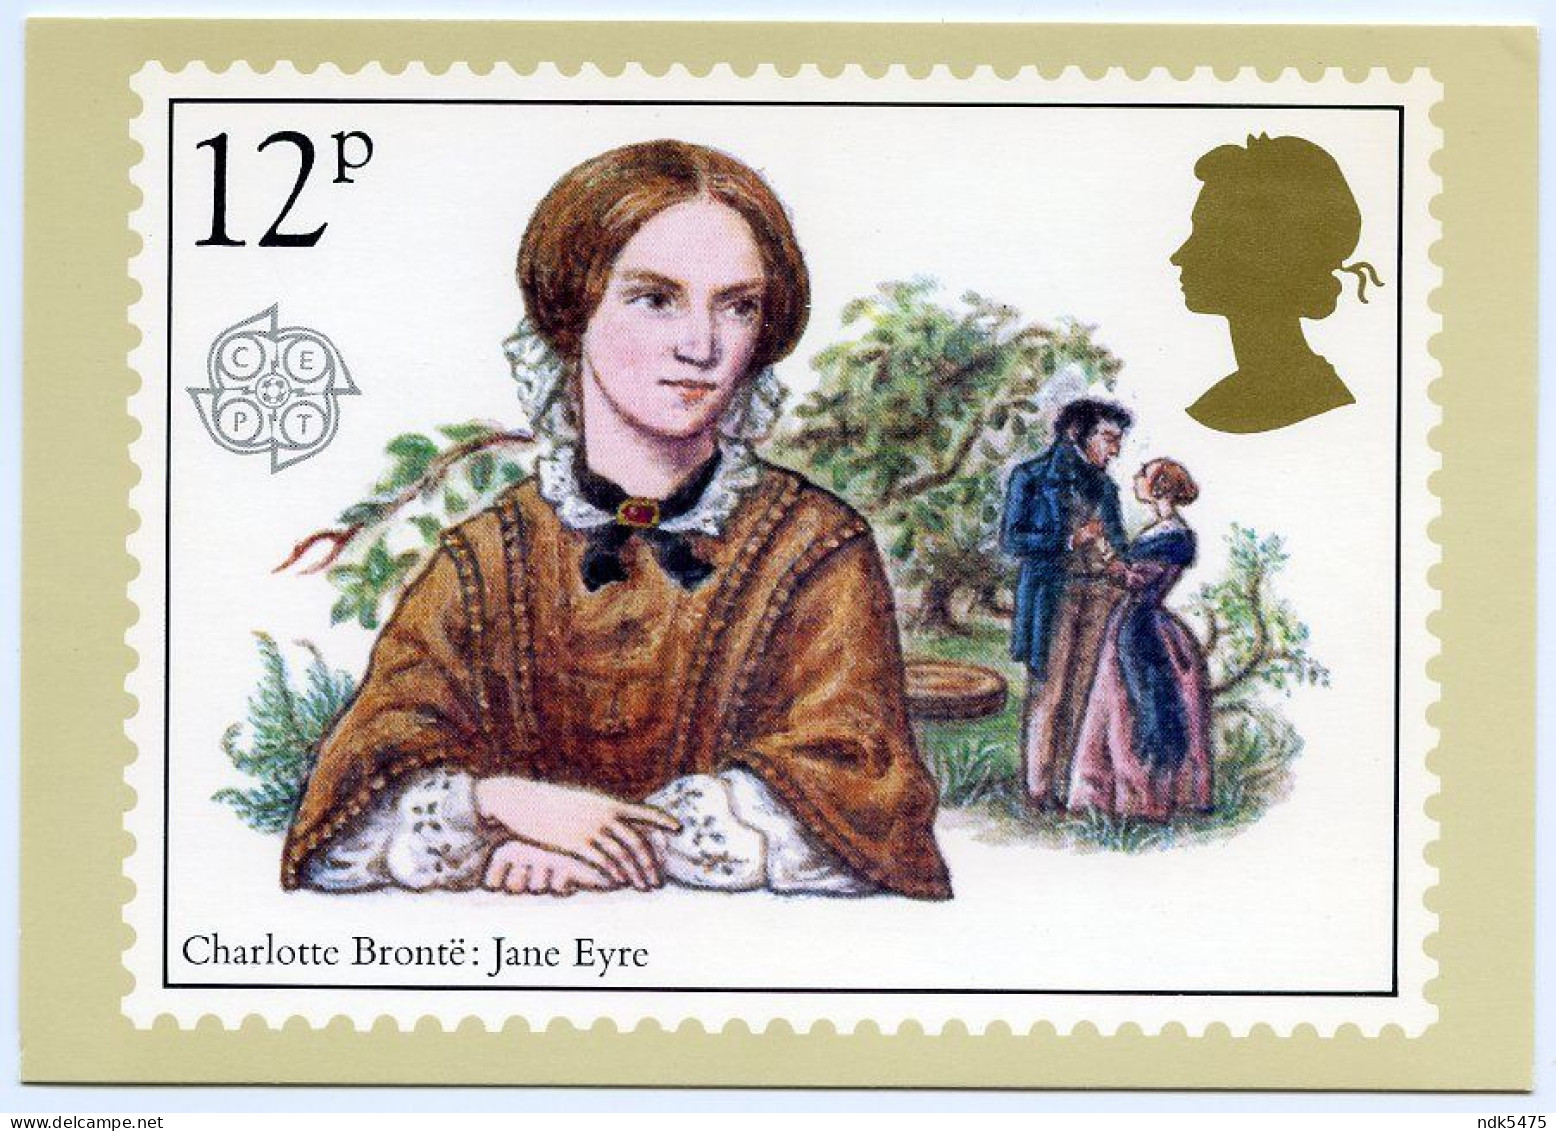 PHQ 1980 : CHARLOTTE BRONTE - JANE EYRE  (10 X 15cms Approx.) - Cartes PHQ